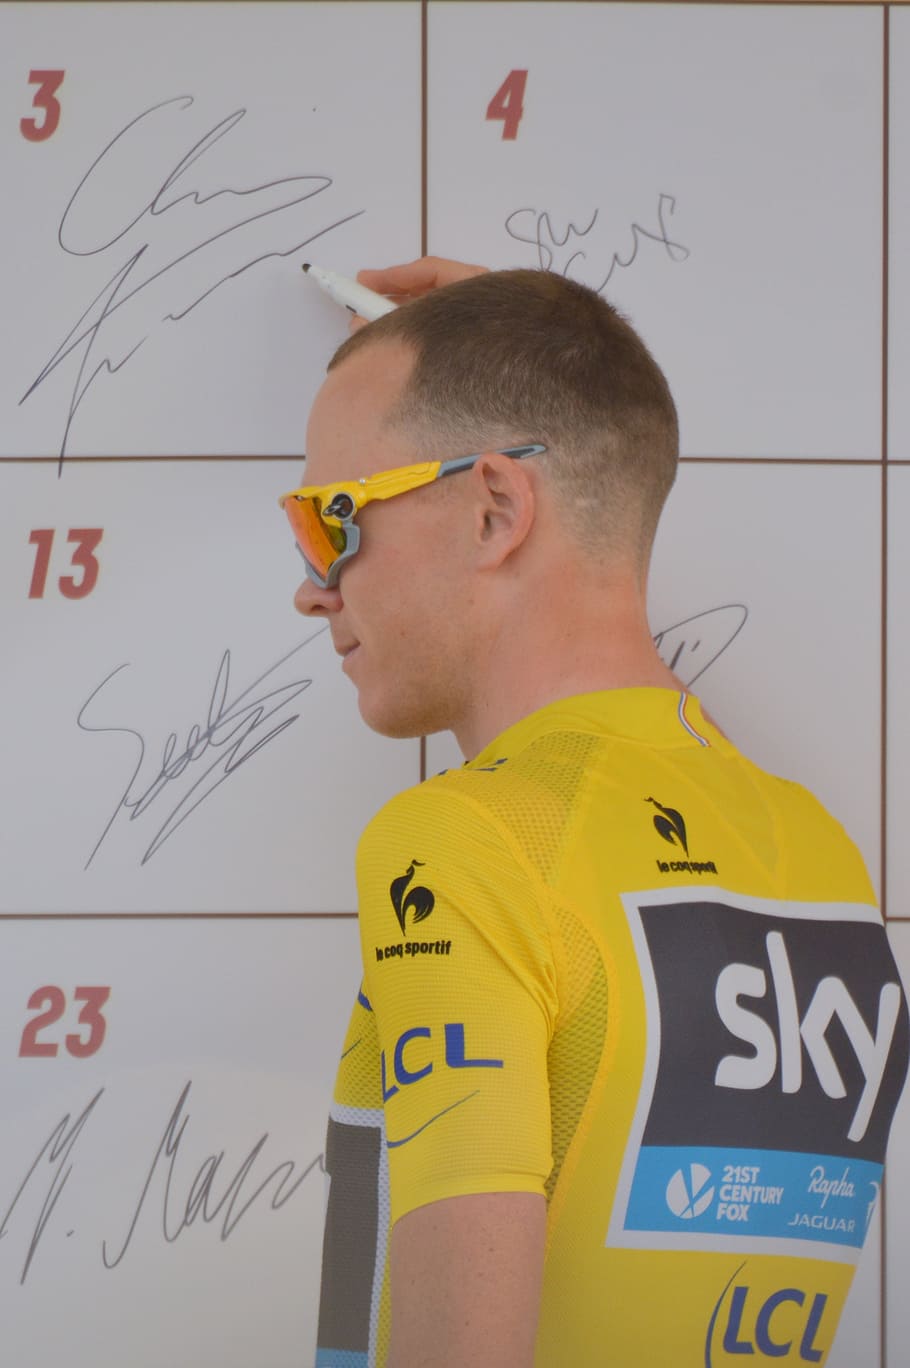 chris froome, champion, yellow jersey, celebrity, cyclist, professional road bicycle racer, man, people, winner, text